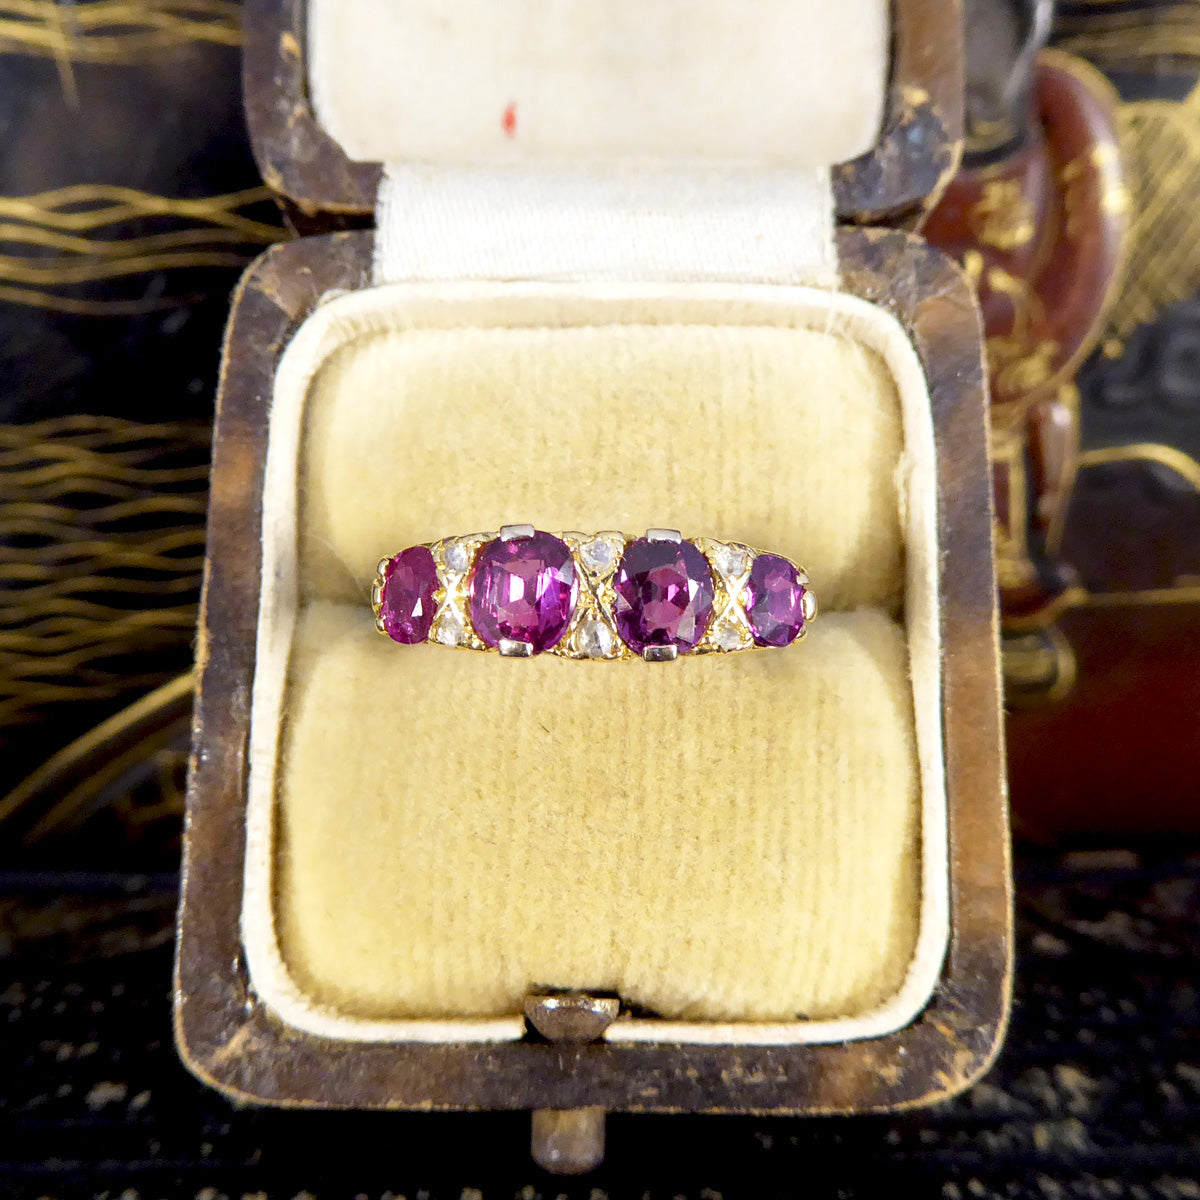 Antique Edwardian 1.18ct Ruby Four Stone Ring with Diamond Spacers Modelled in 18ct Yellow Gold